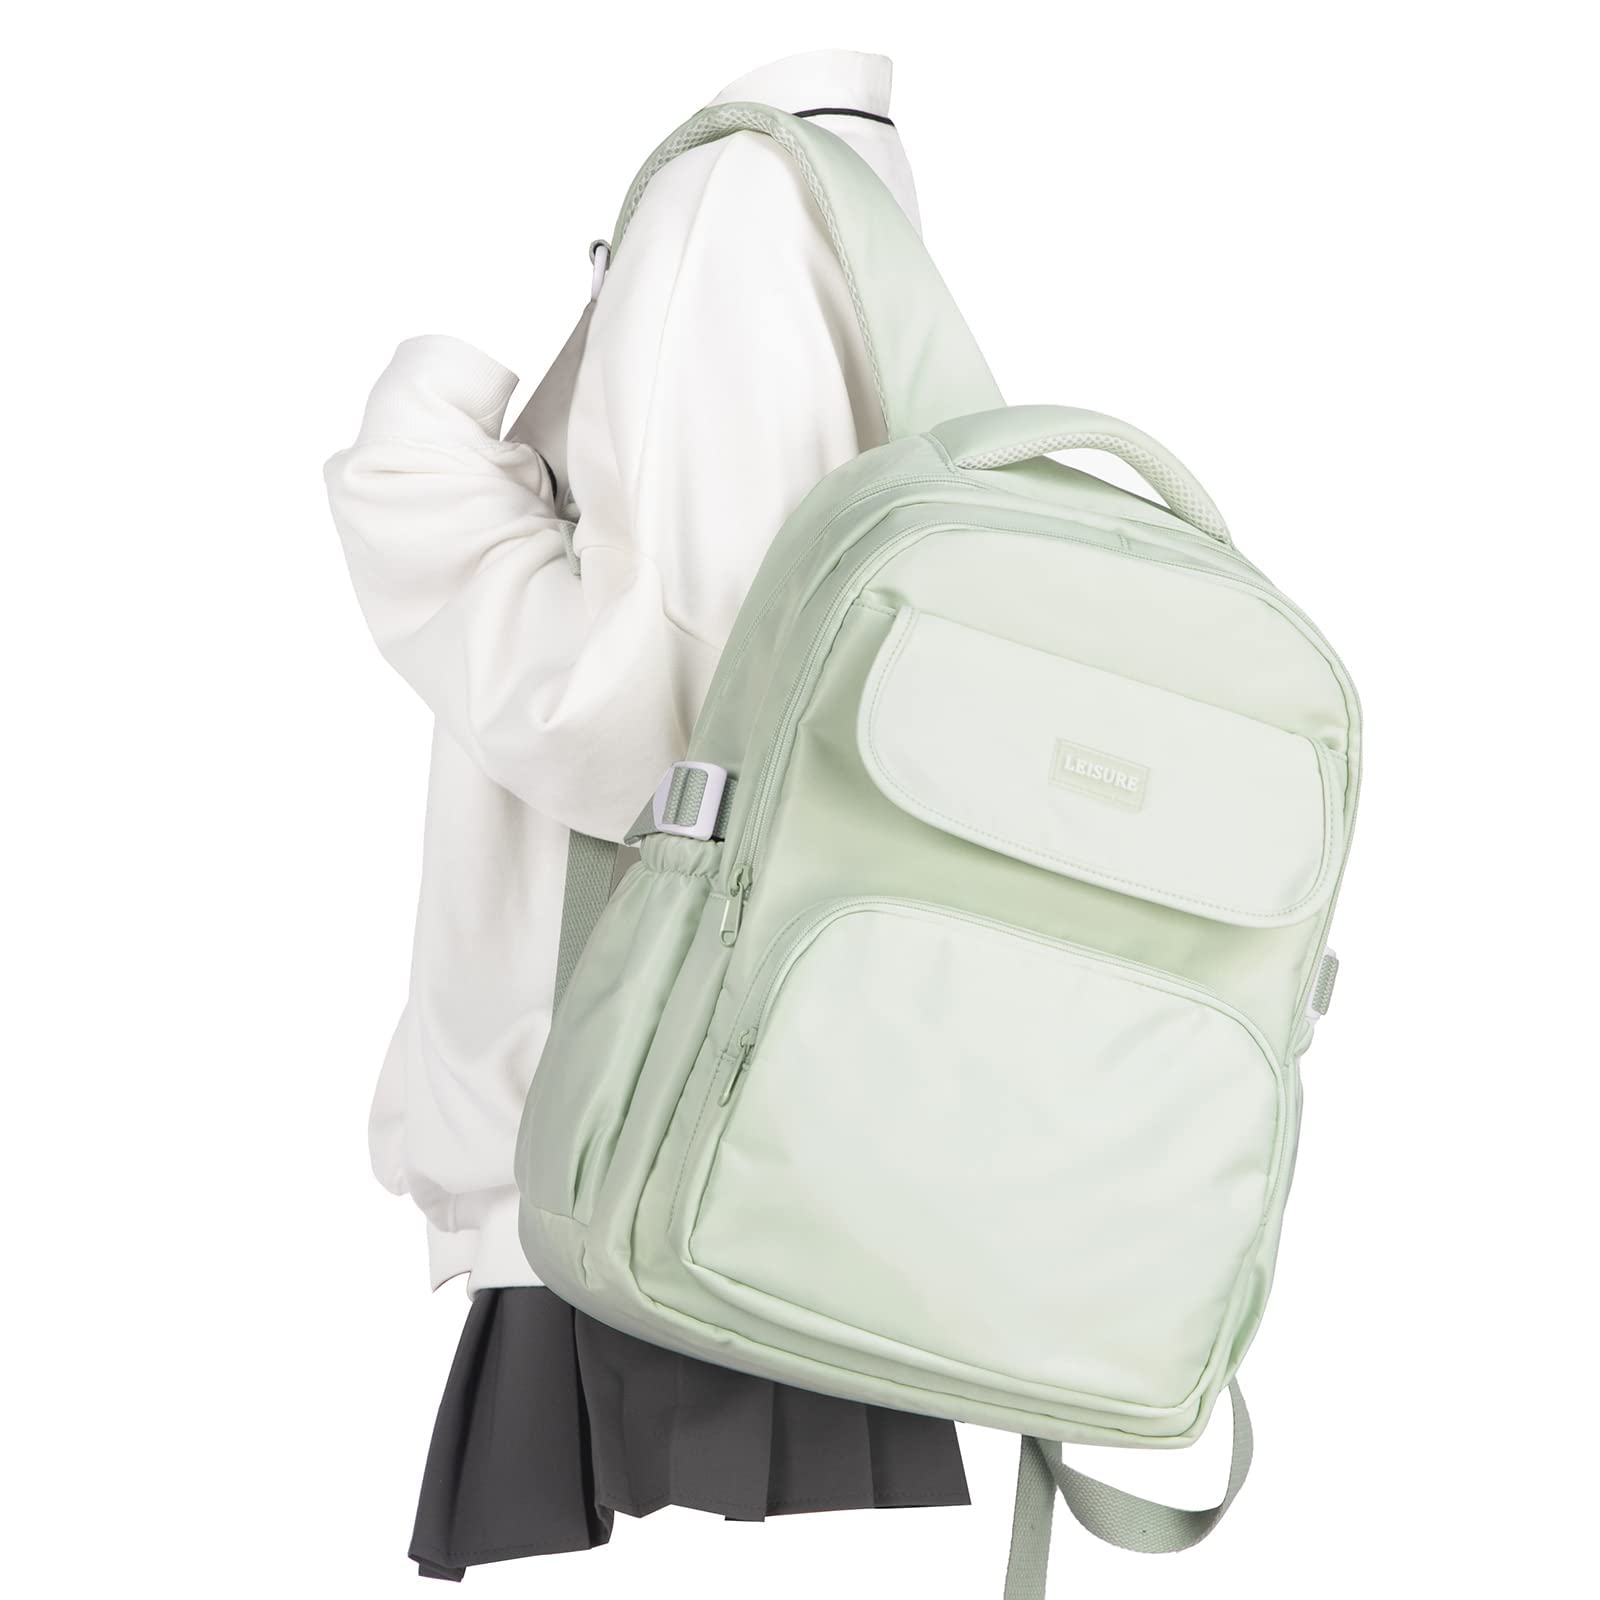 Everything You Need to Know About Laptop Backpacks